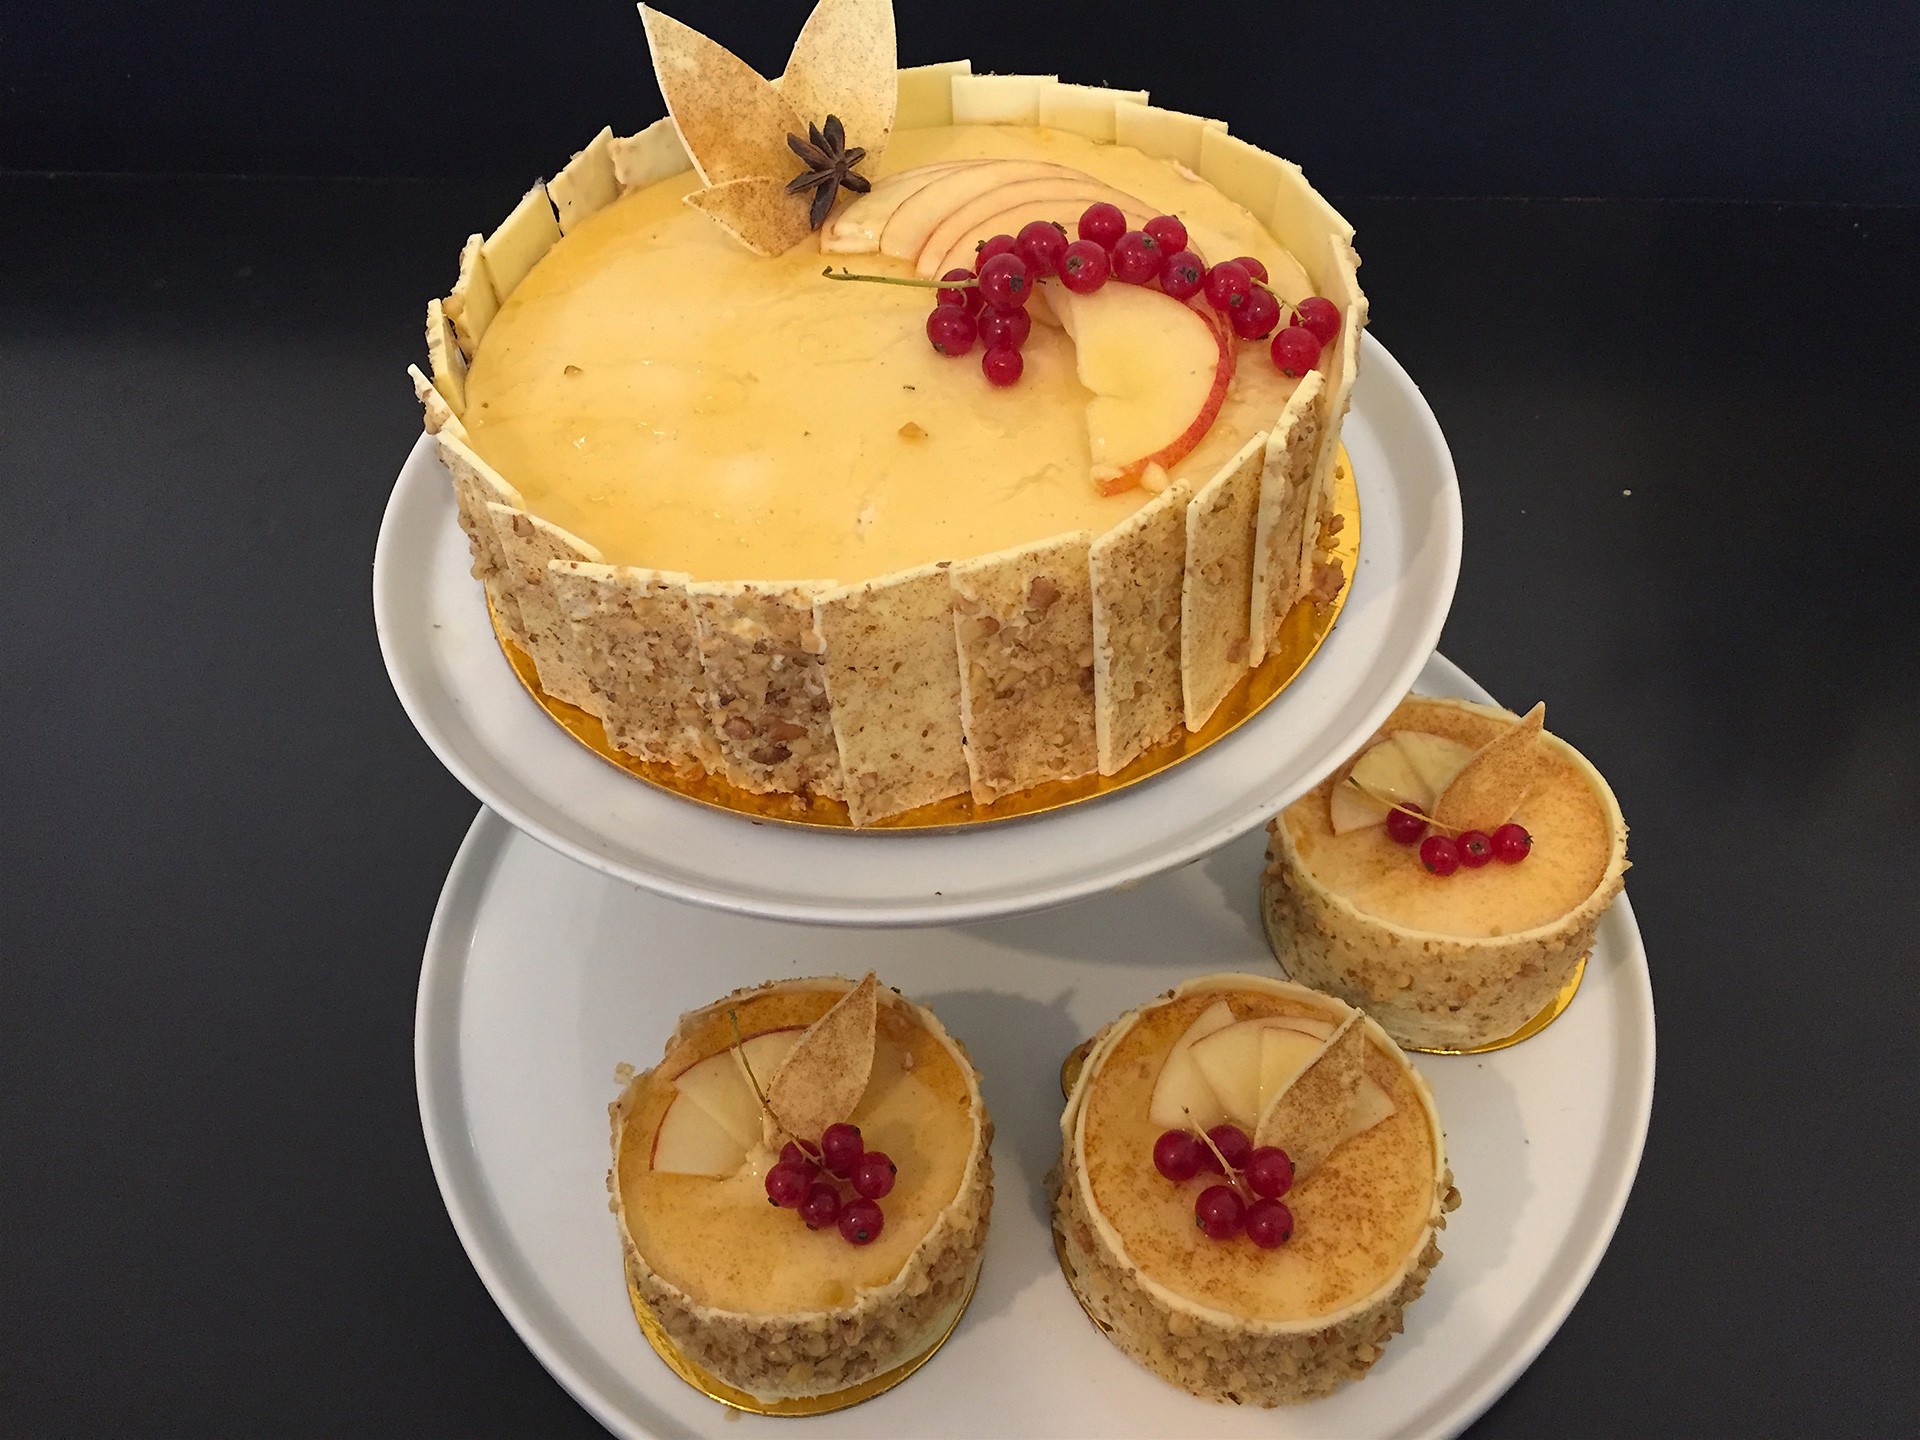 Masse's Pastries'  G/F apple walnut torte has layers of walnut almond sponge cake, sautéed apple compote and lightly spiced honey mascarpone Bavarian creme, encircled by a band of white chocolate, available in large and individual sizes.